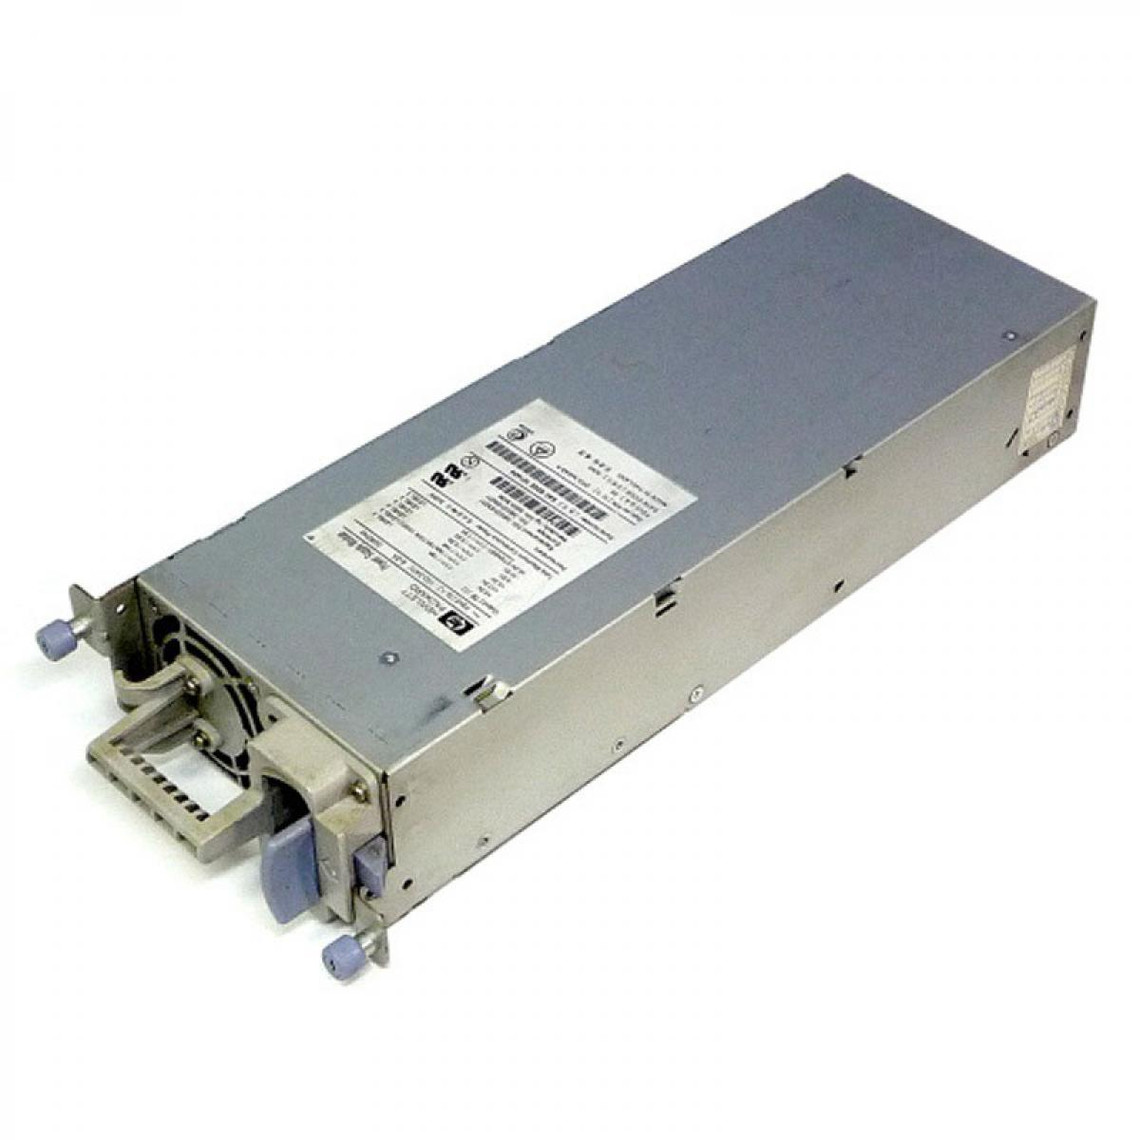 Alimentation modulaire Hp Alimentation HP DPS-349AB A 349W D8520-63001 100-240V Power Supply